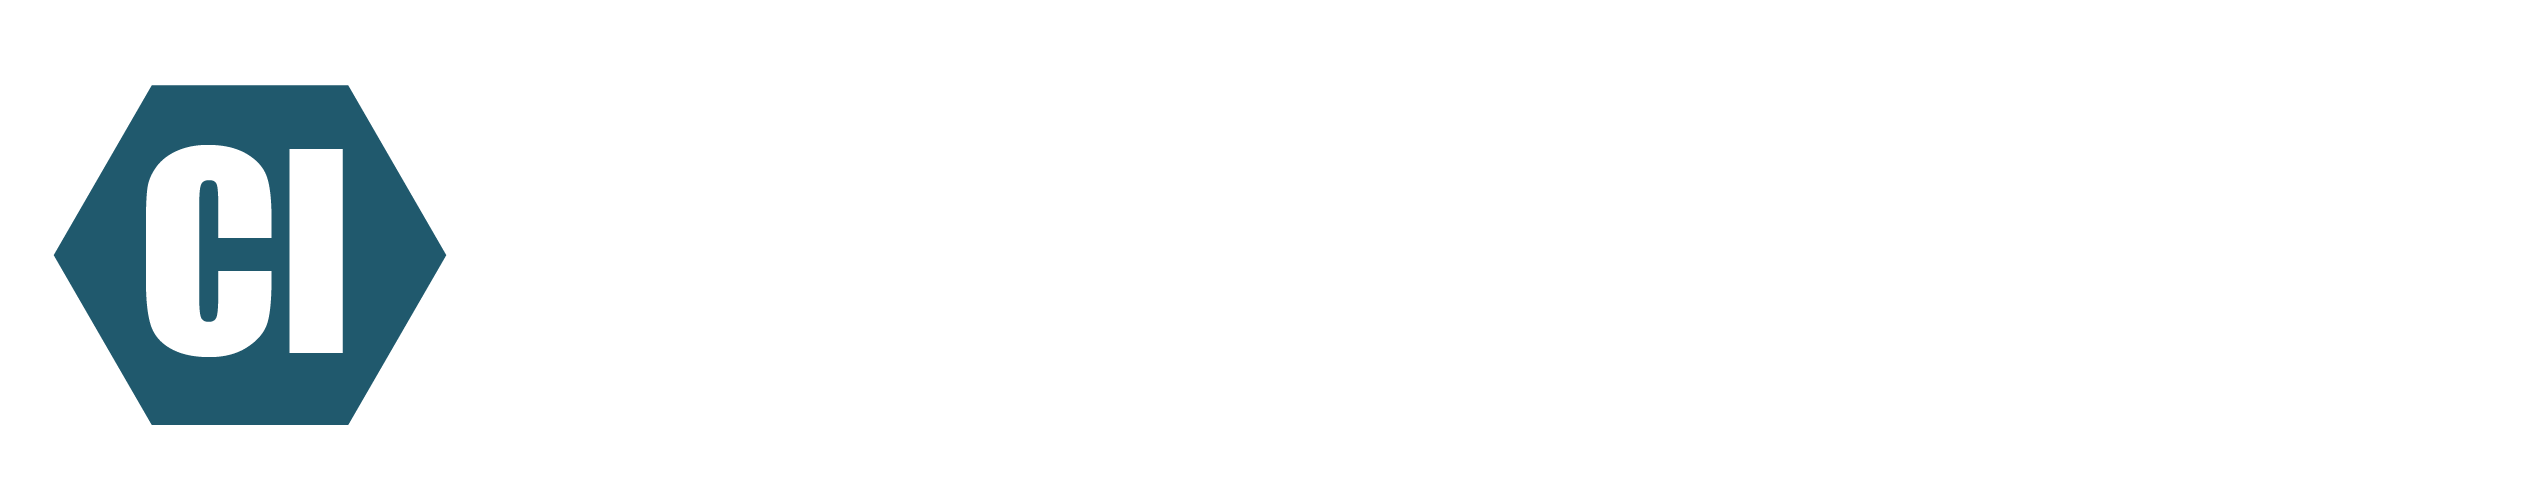 Currency Informer - CryptoCurrency Tracker logo